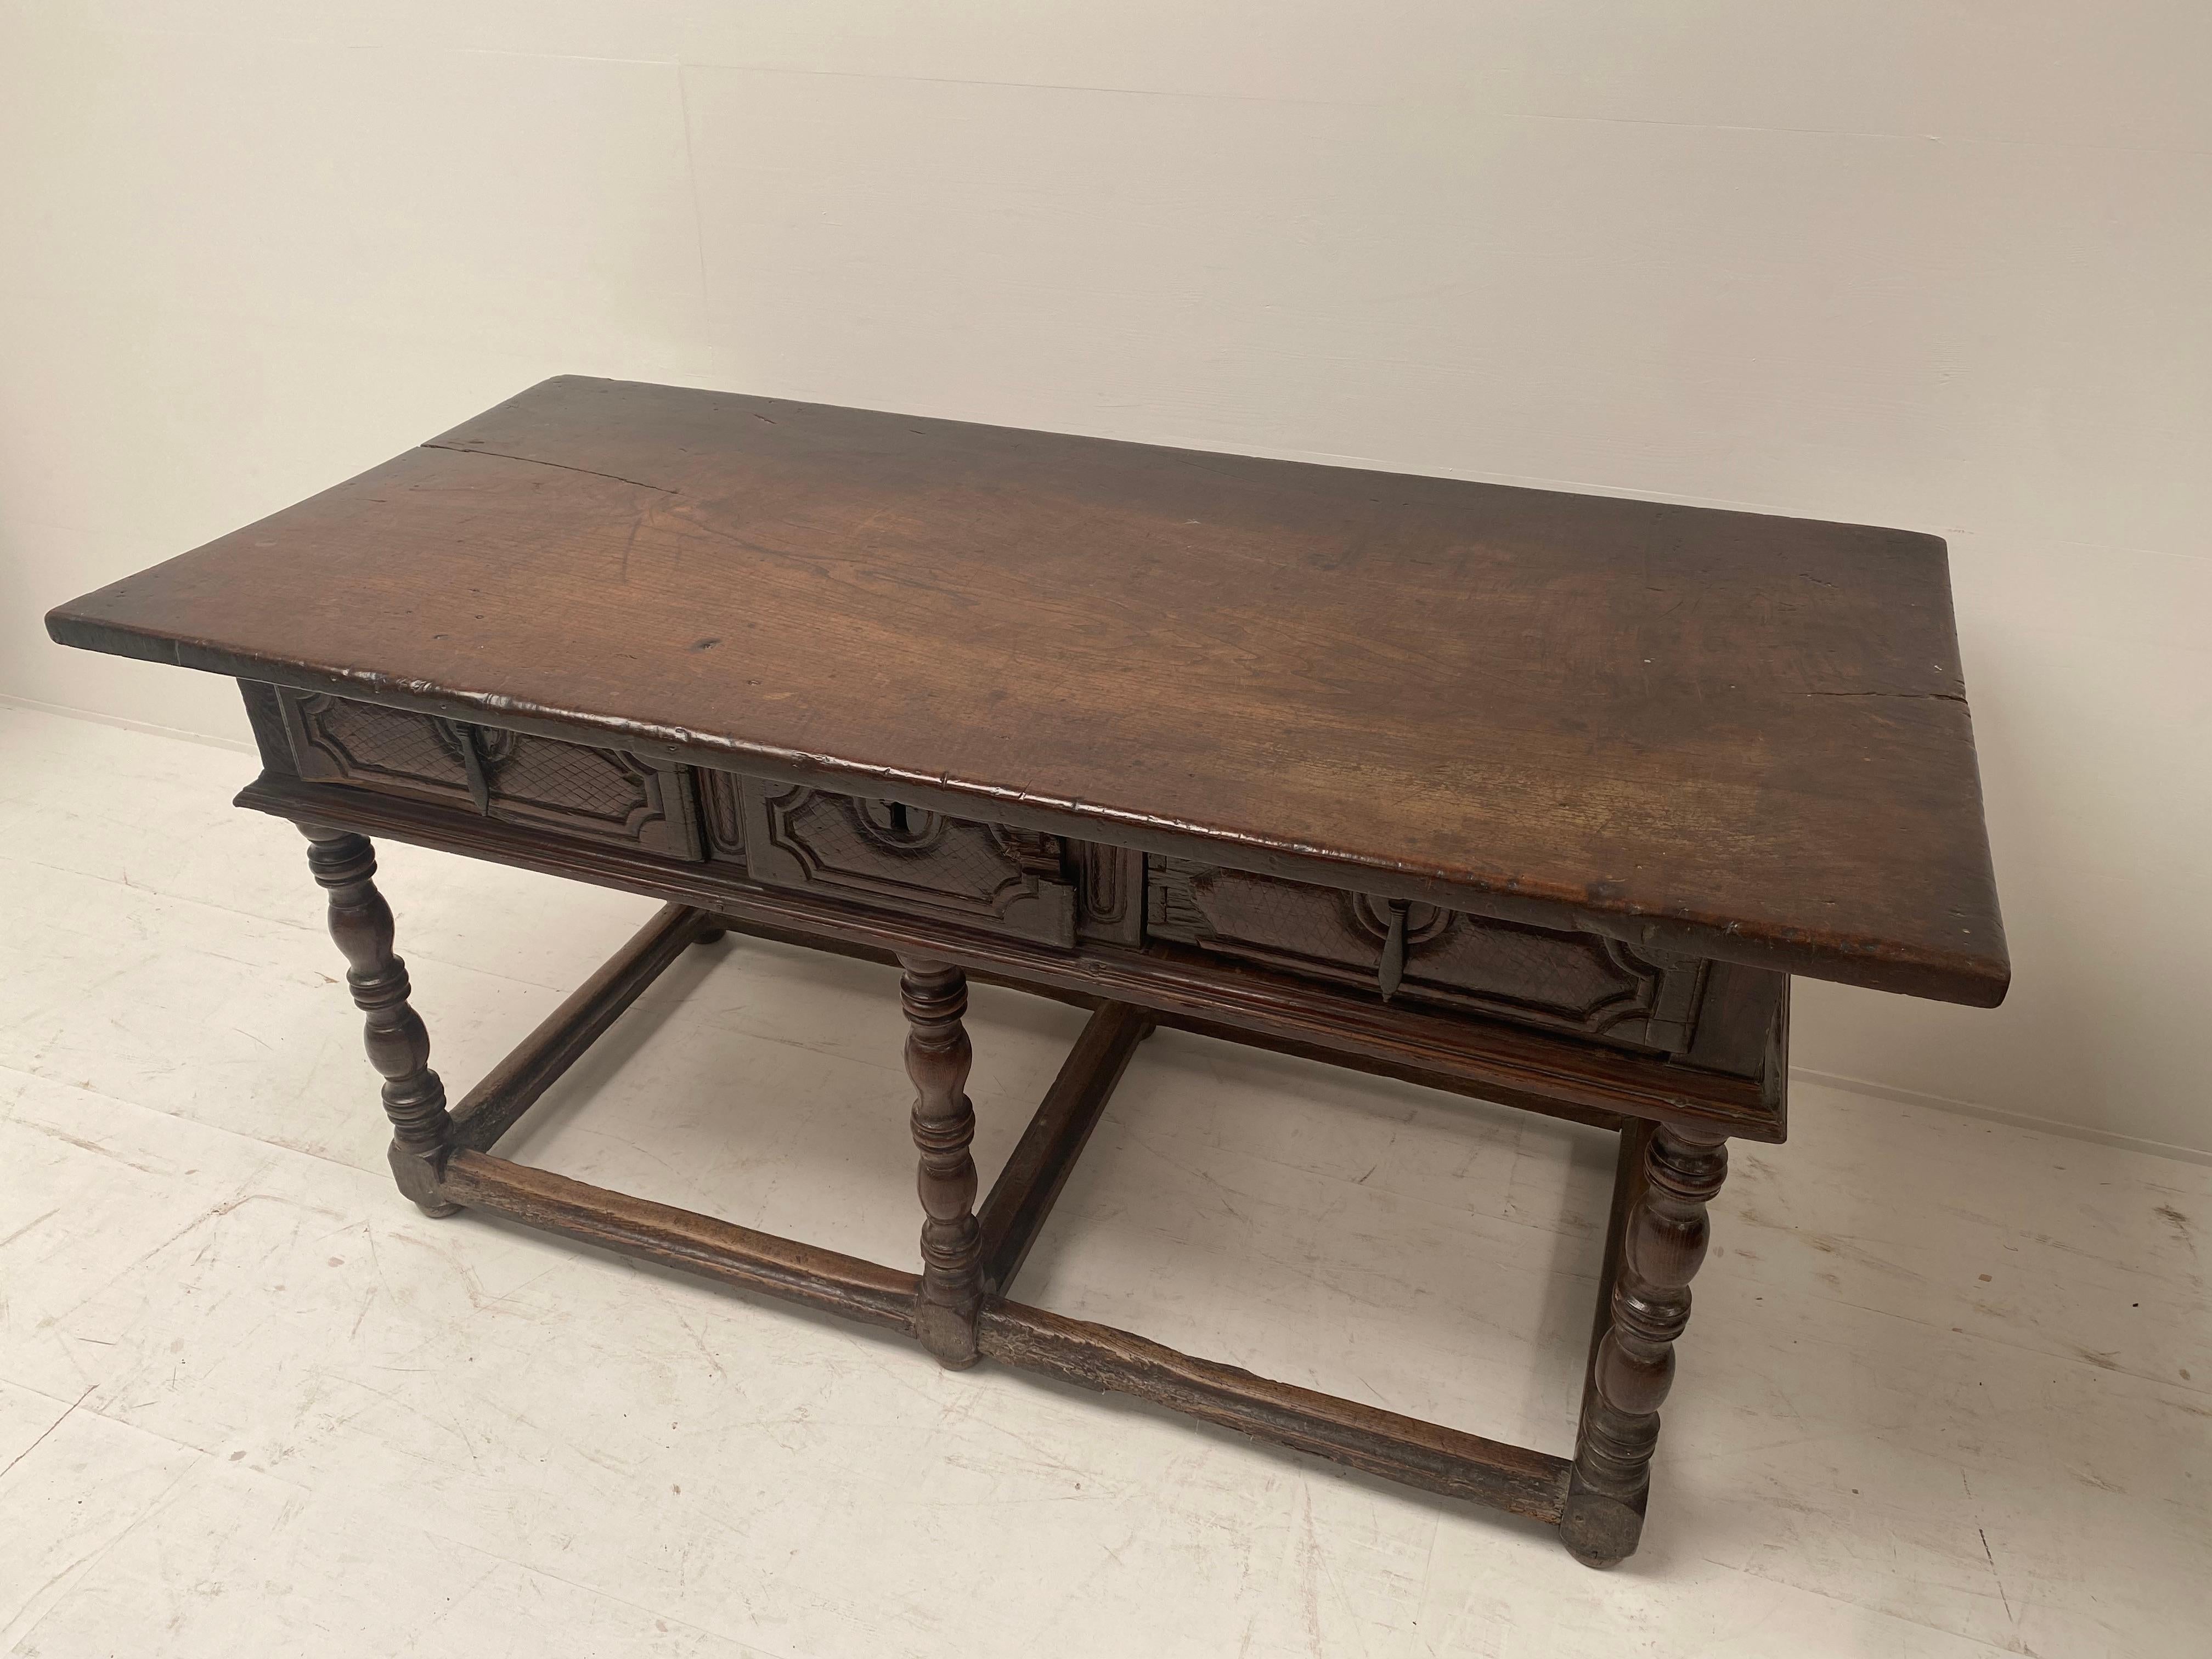 Beautiful Spanish Chestnut table with 3 drawers,
one piece wood table top,
6 turned legs and simply carved panels at the back and the side of the table,
so the table can be used as a center table.
a piece of furniture with a lot of character,
looks